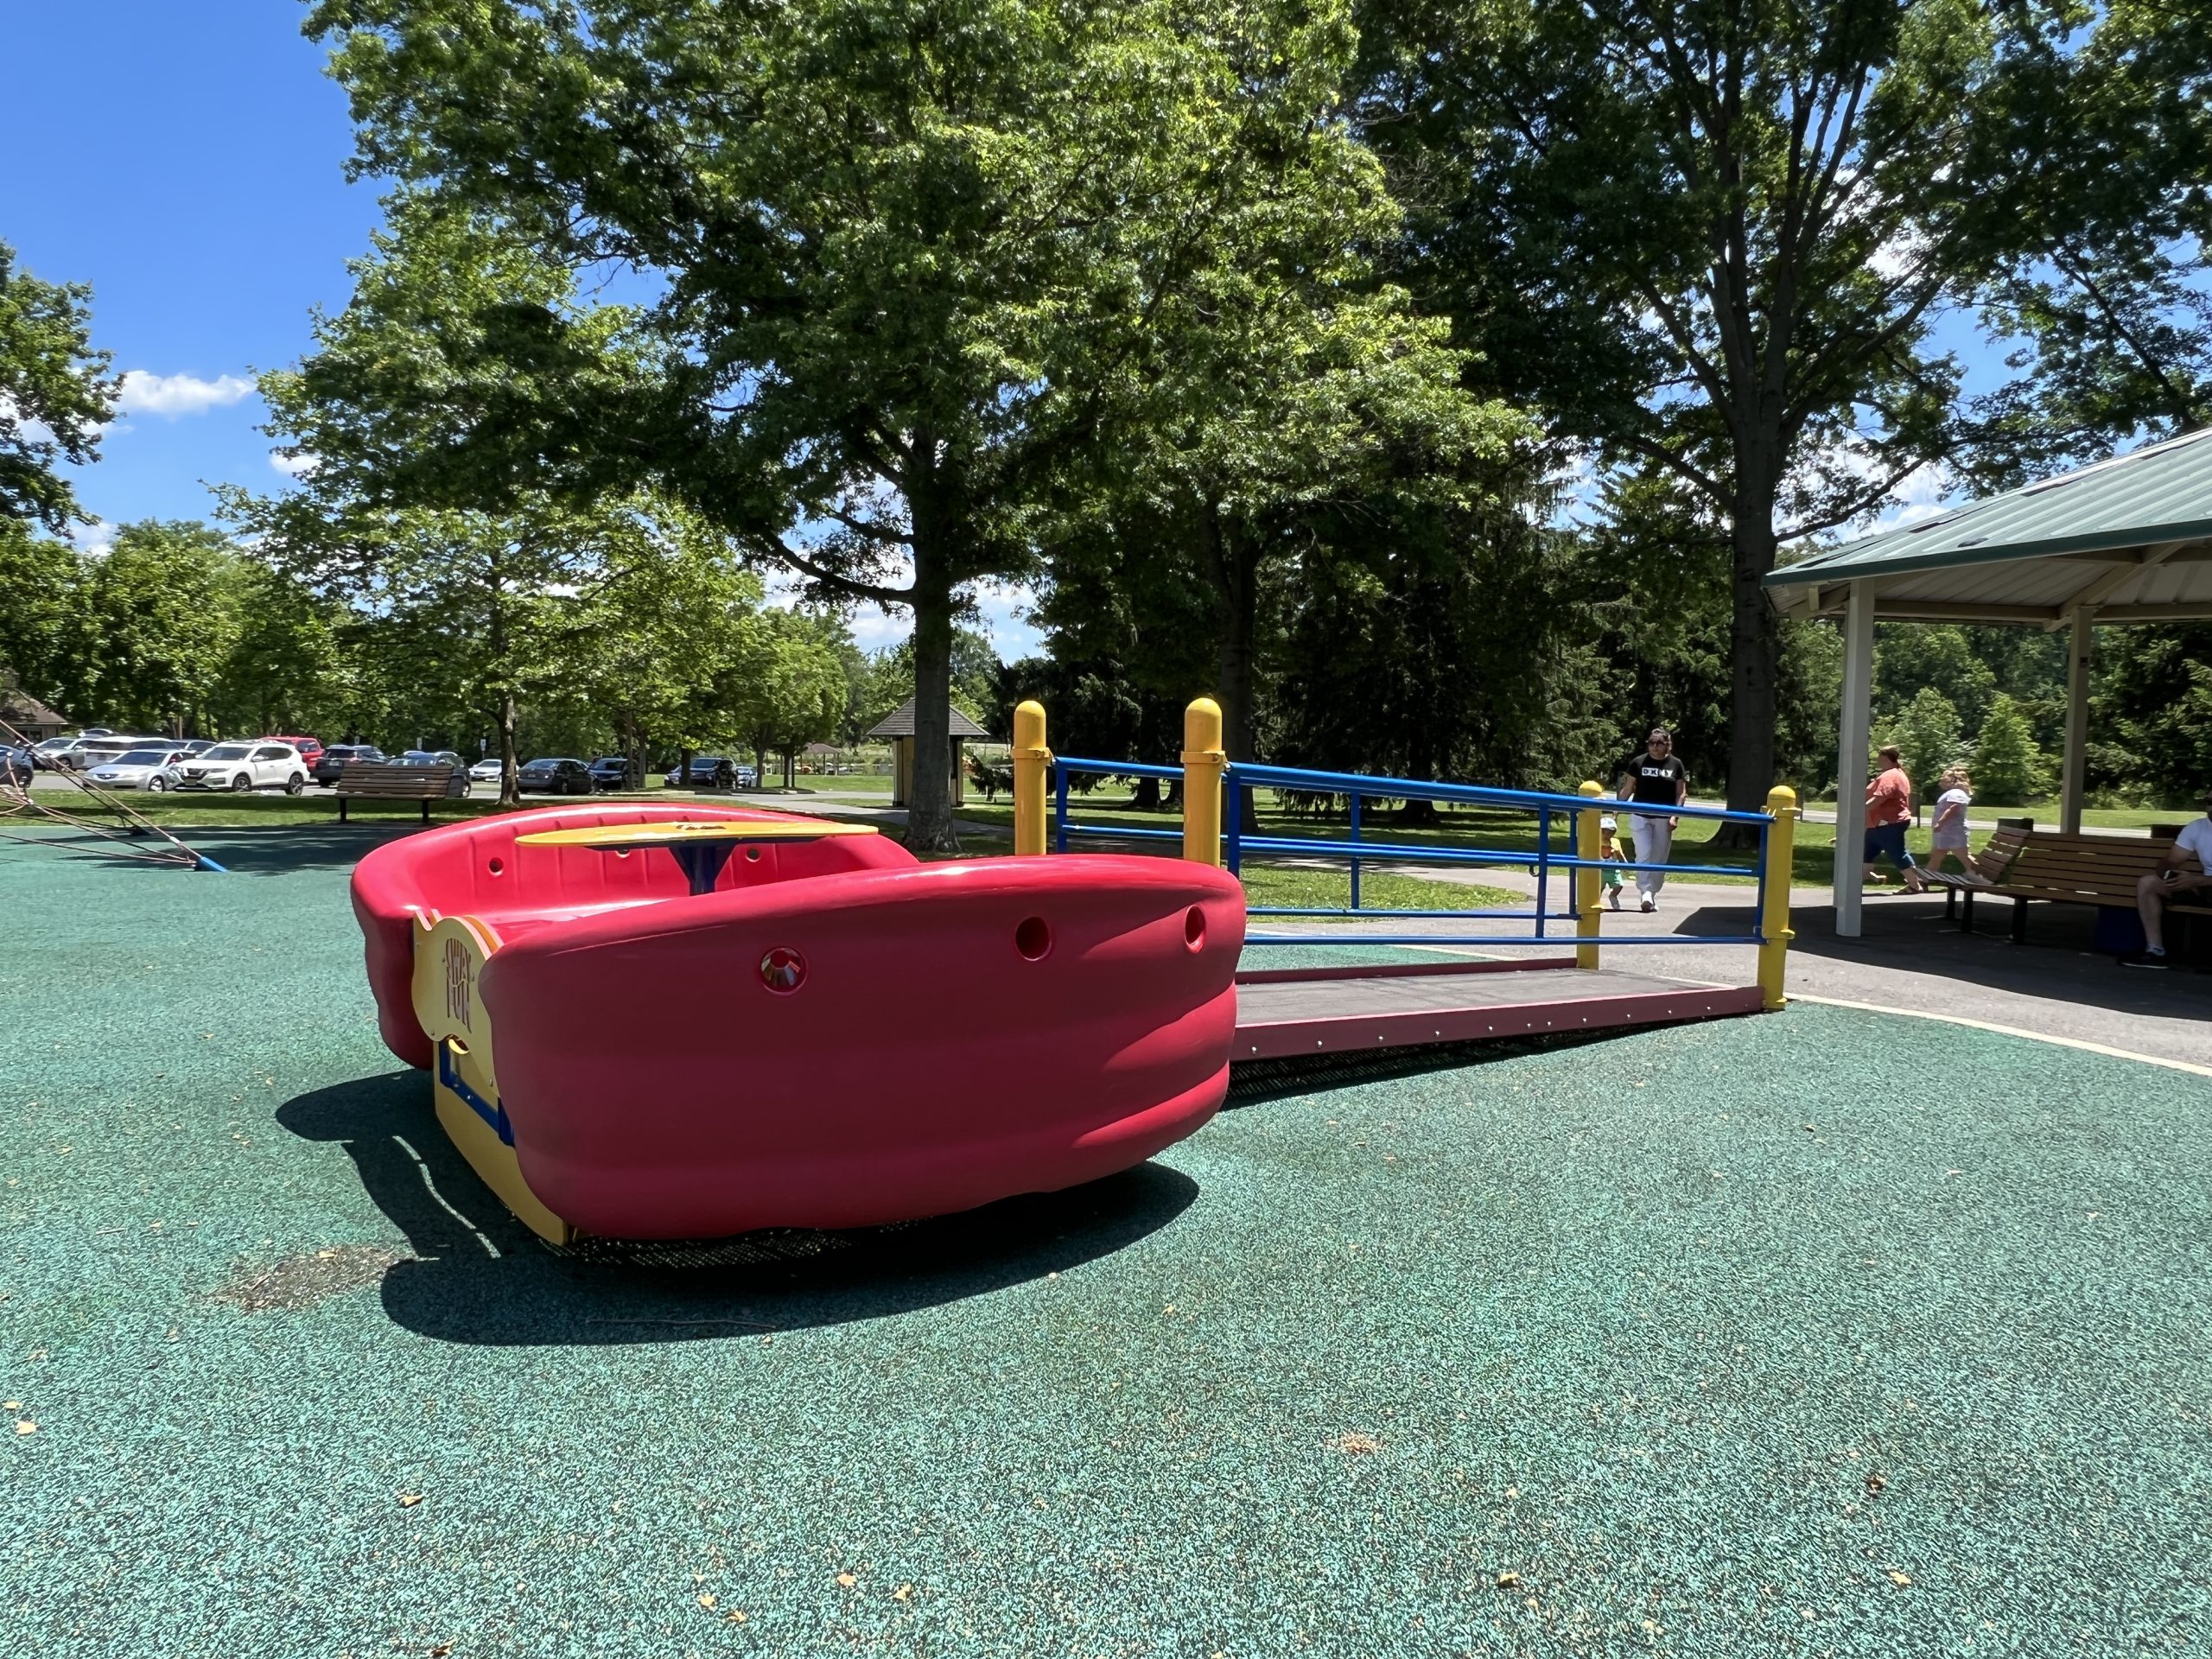 Colonial-Park-Playground-in-Somerset-NJ-wheelchair-accessible-cruiser-1